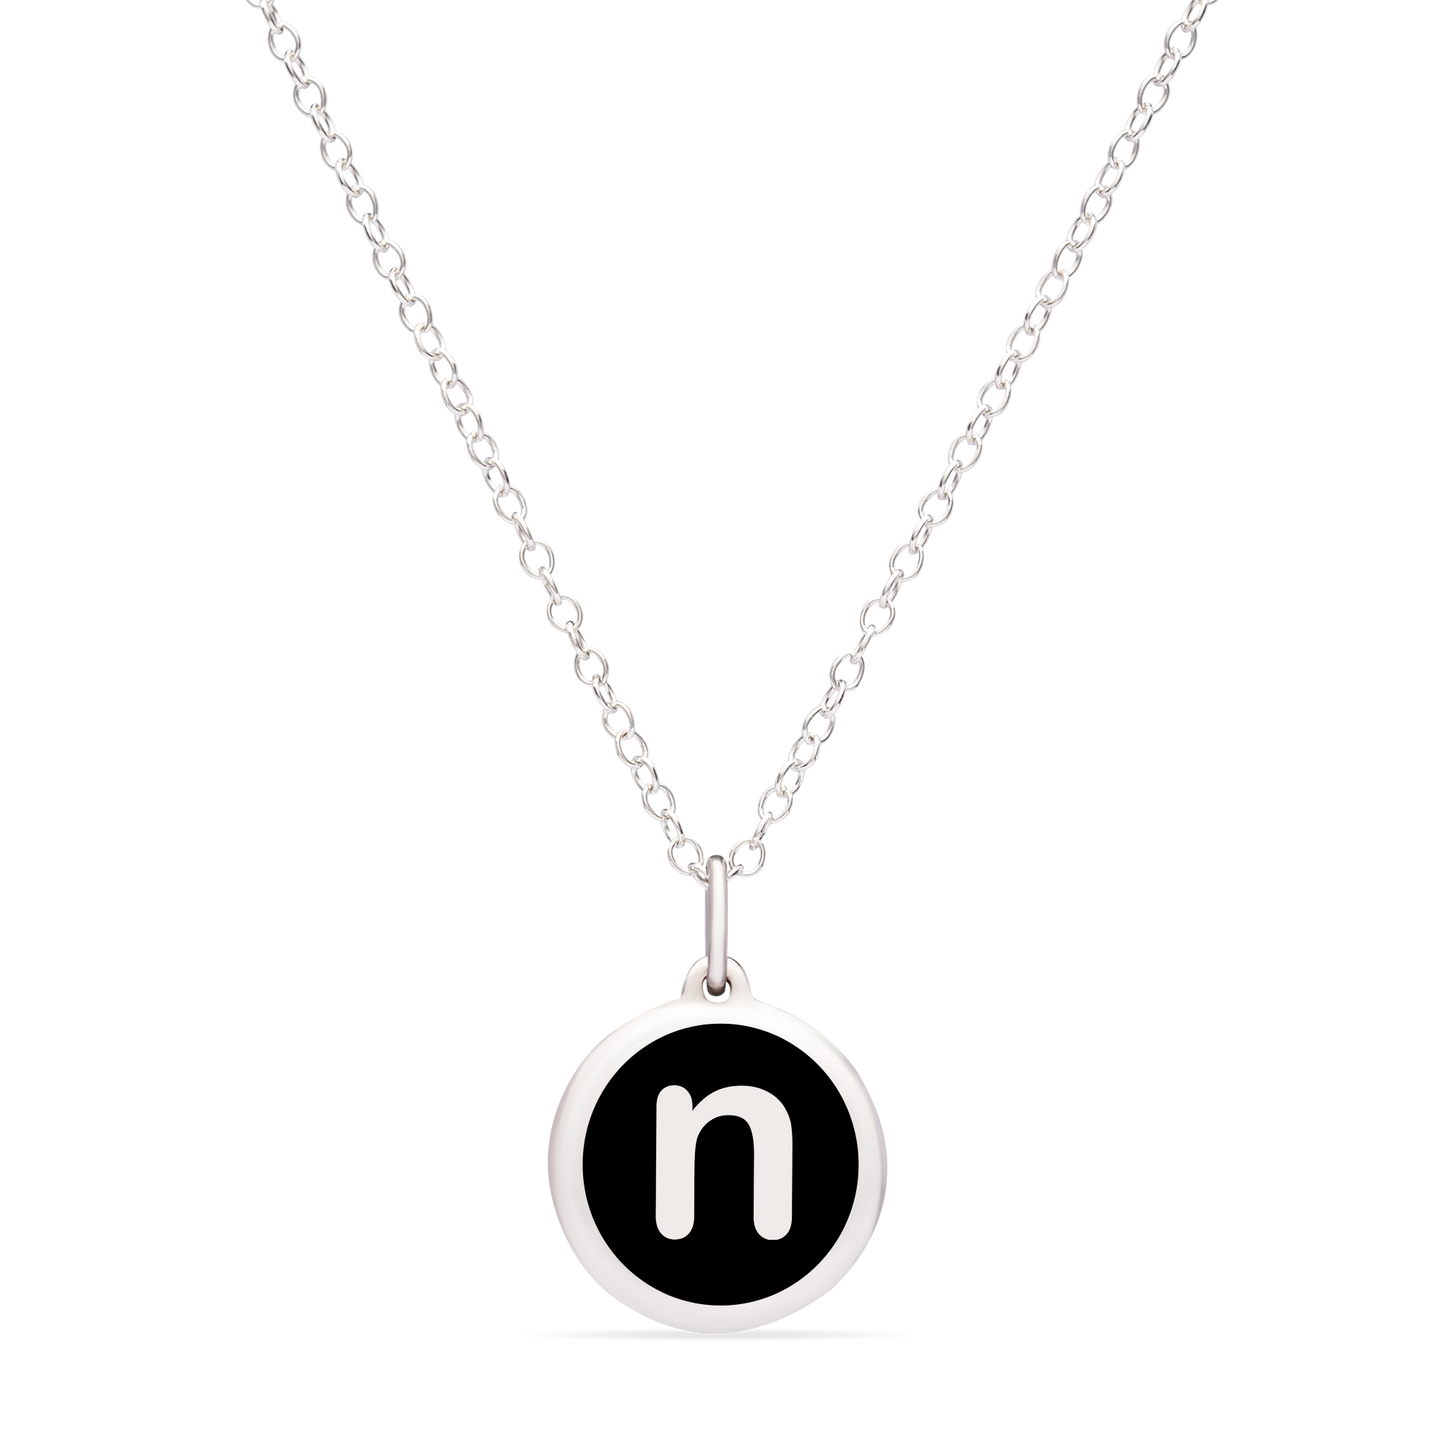 MINI INITIAL 'n' CHARM sterling silver with rhodium plate